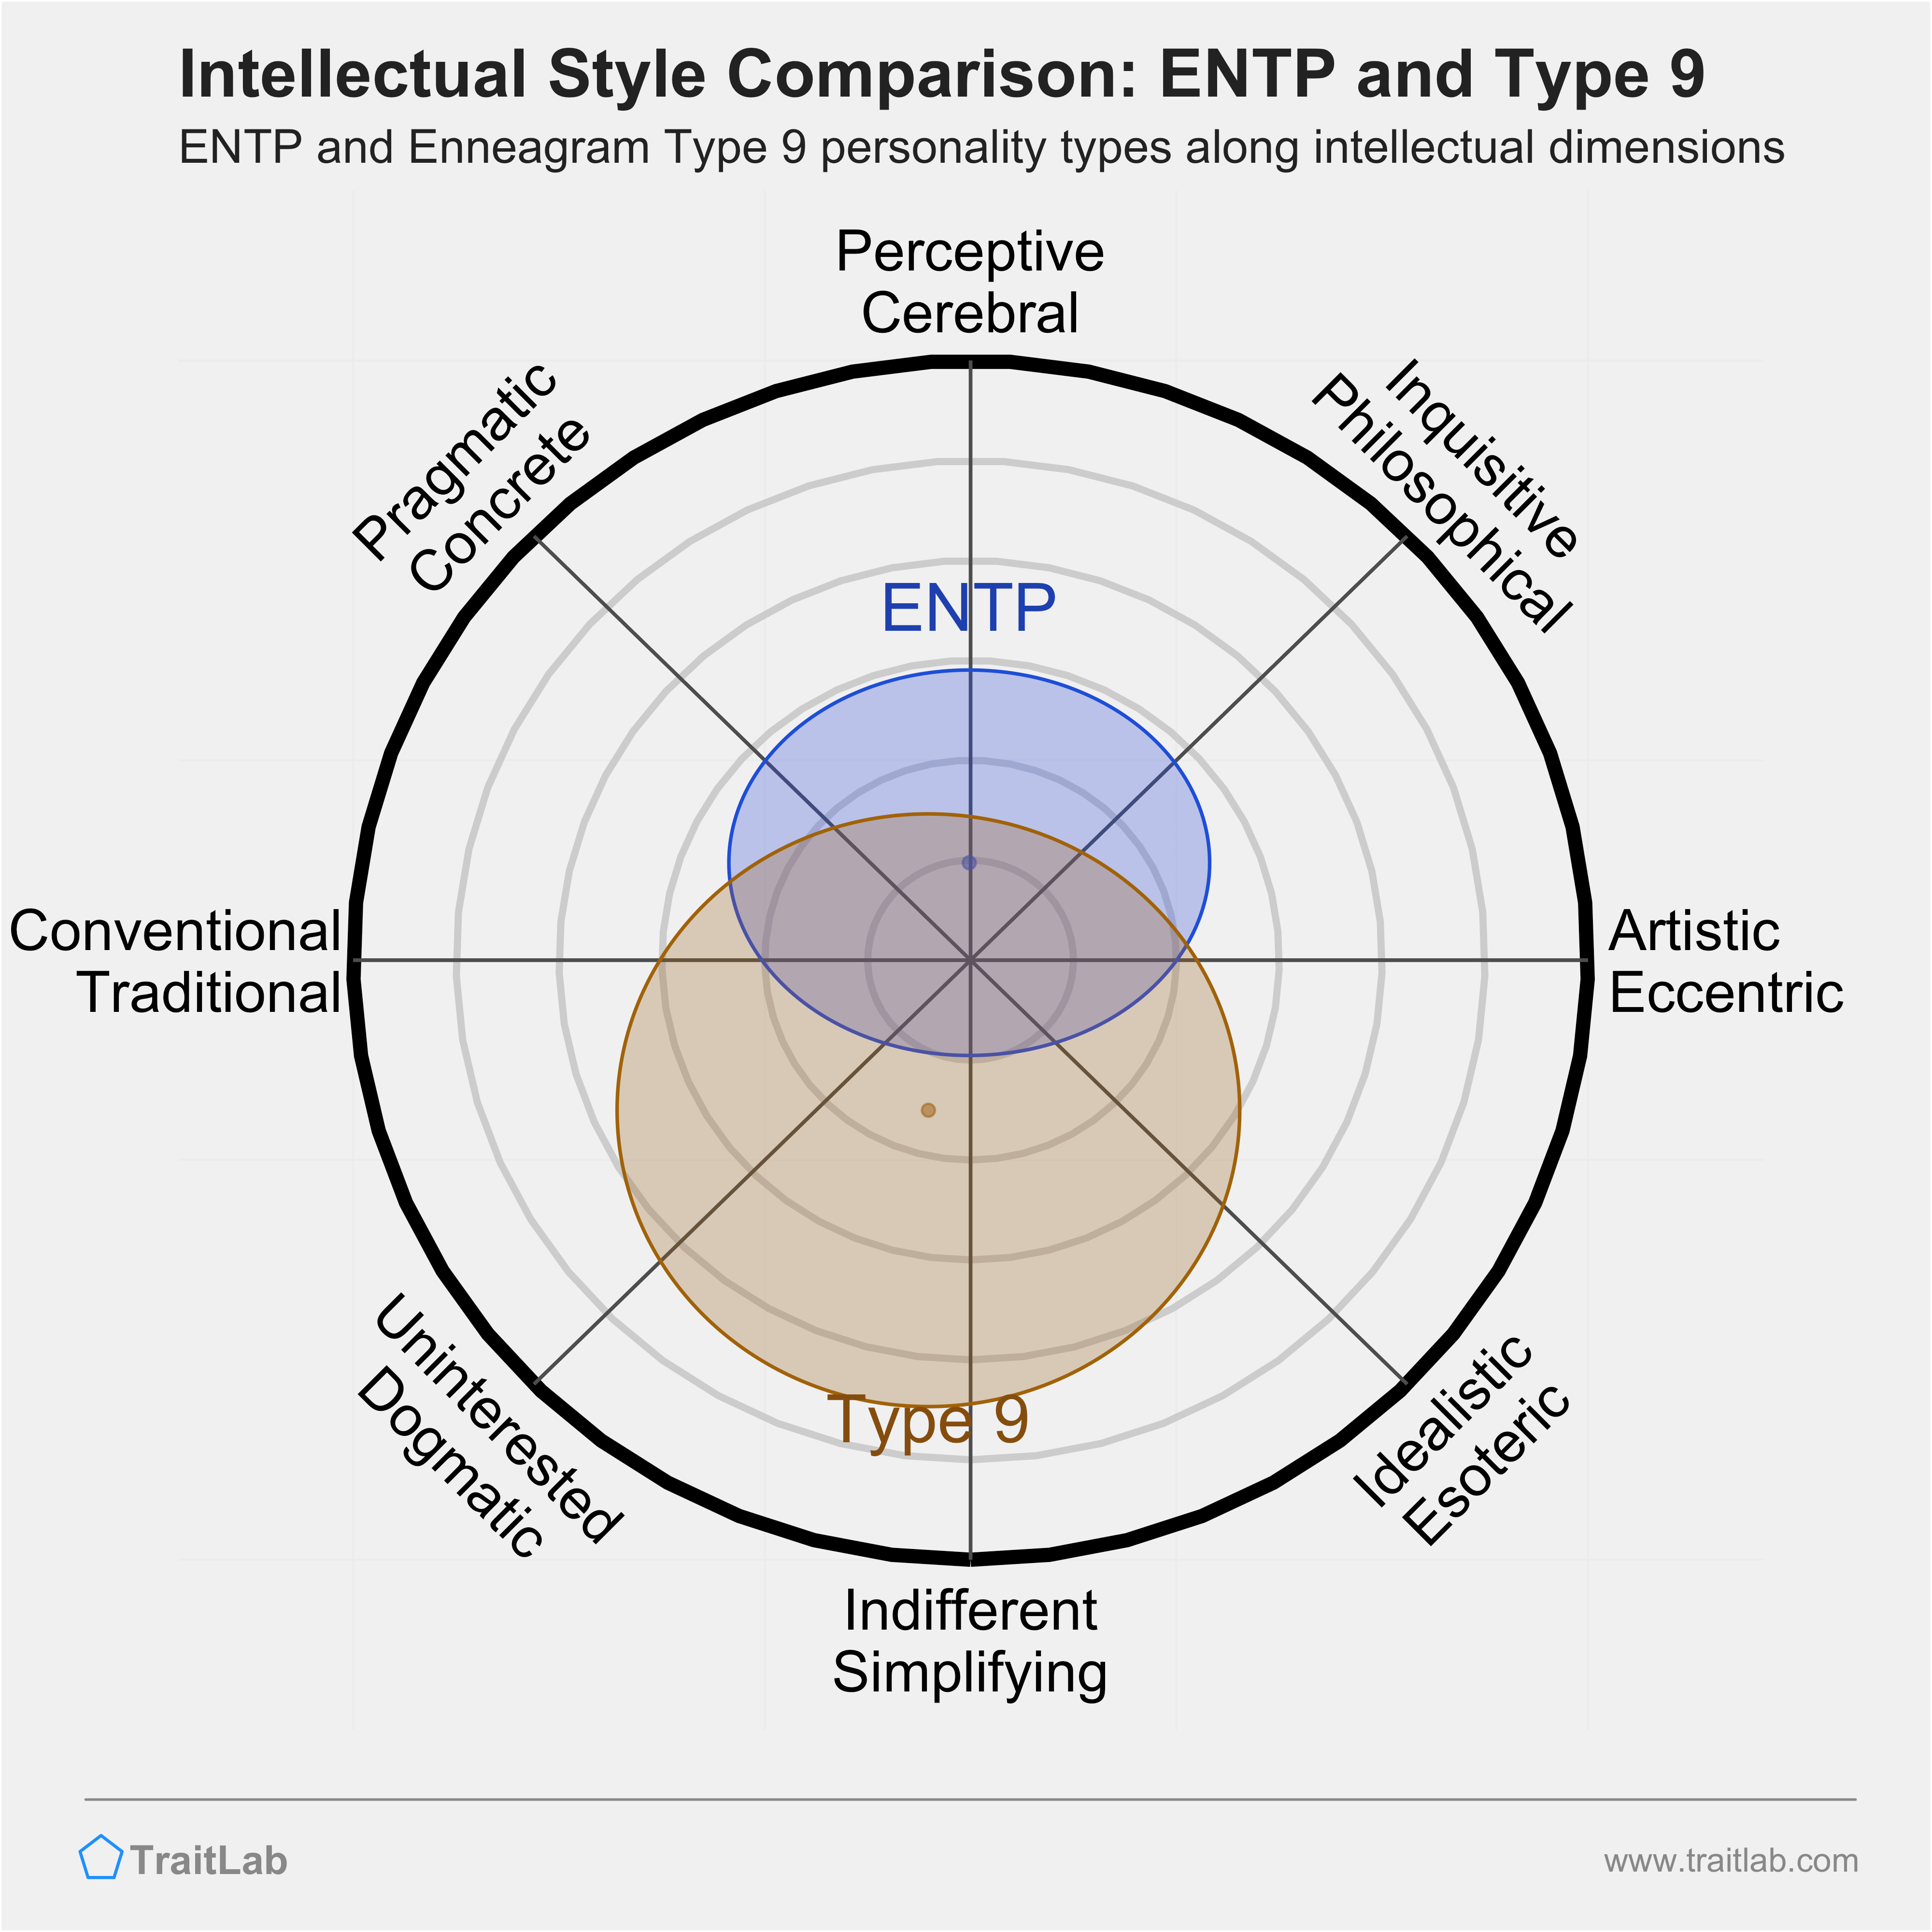 ENTP and Type 9 comparison across intellectual dimensions